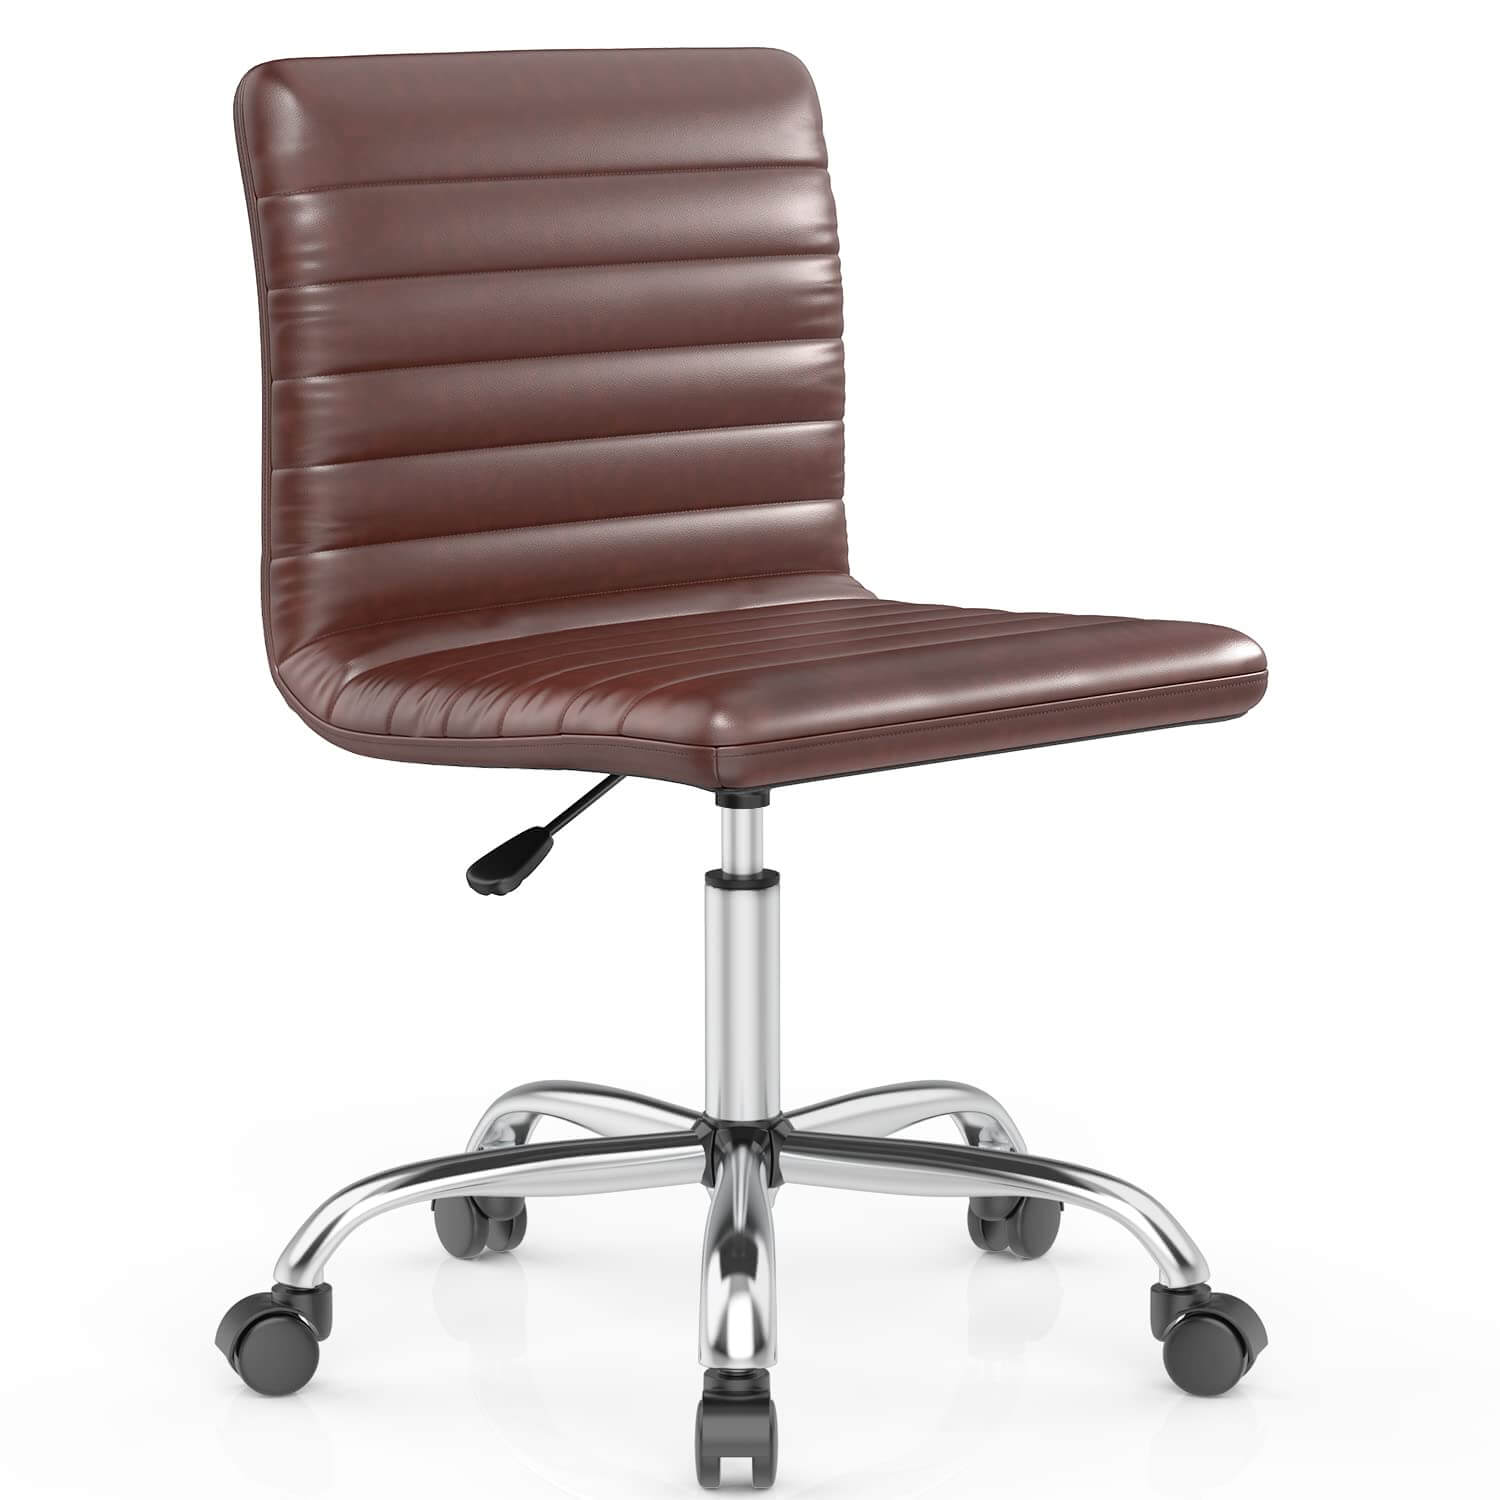 leather-swivel-office-chair-adjustable#Color_Brown